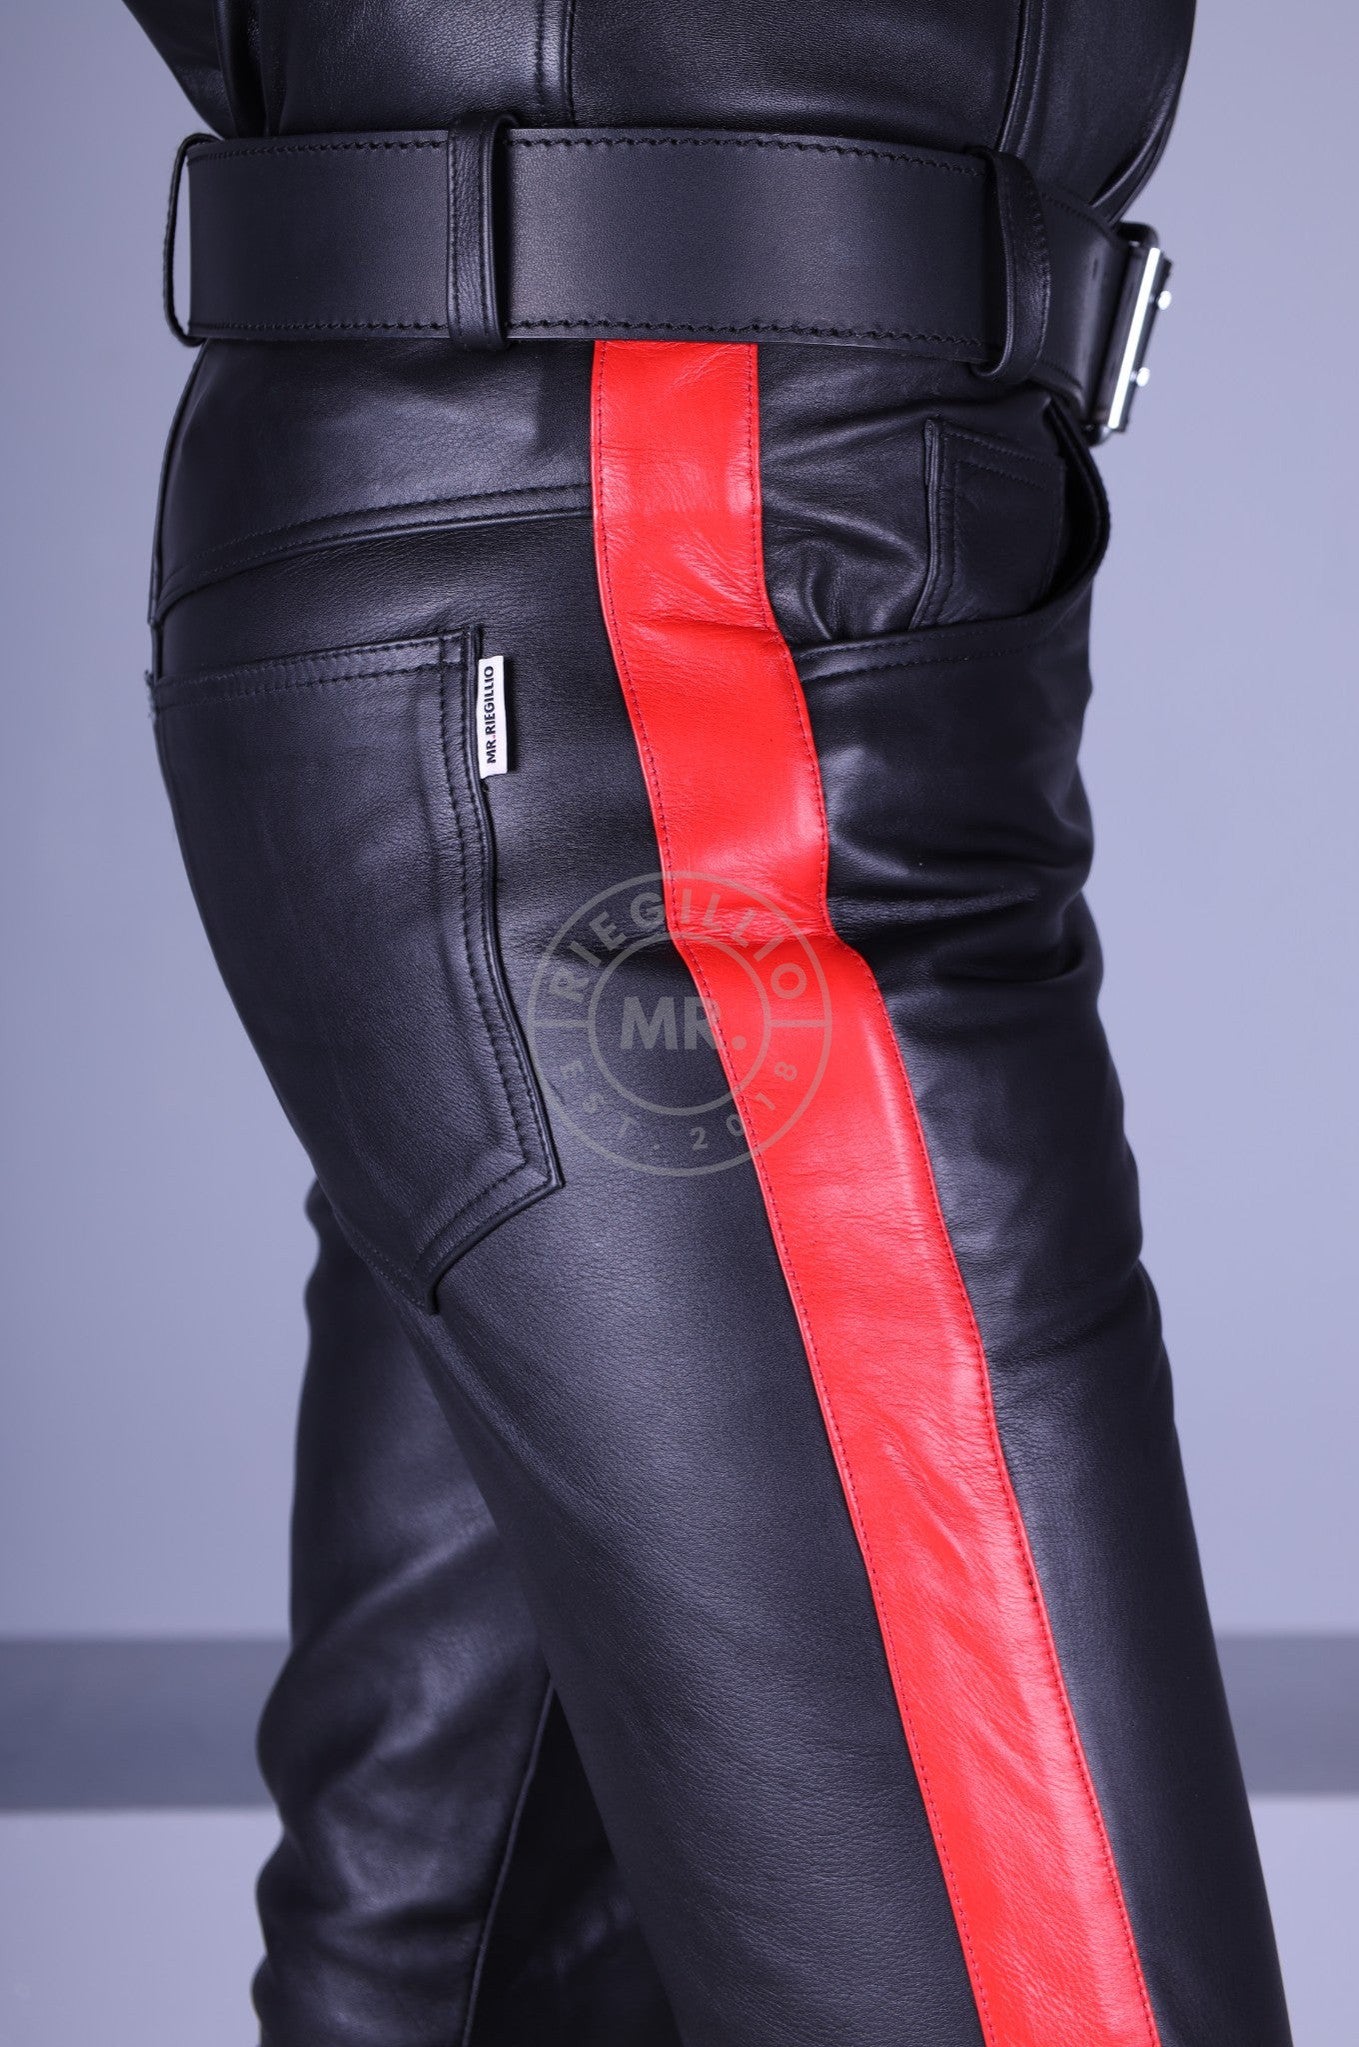 Pin on Gorgeous combination of leather and red